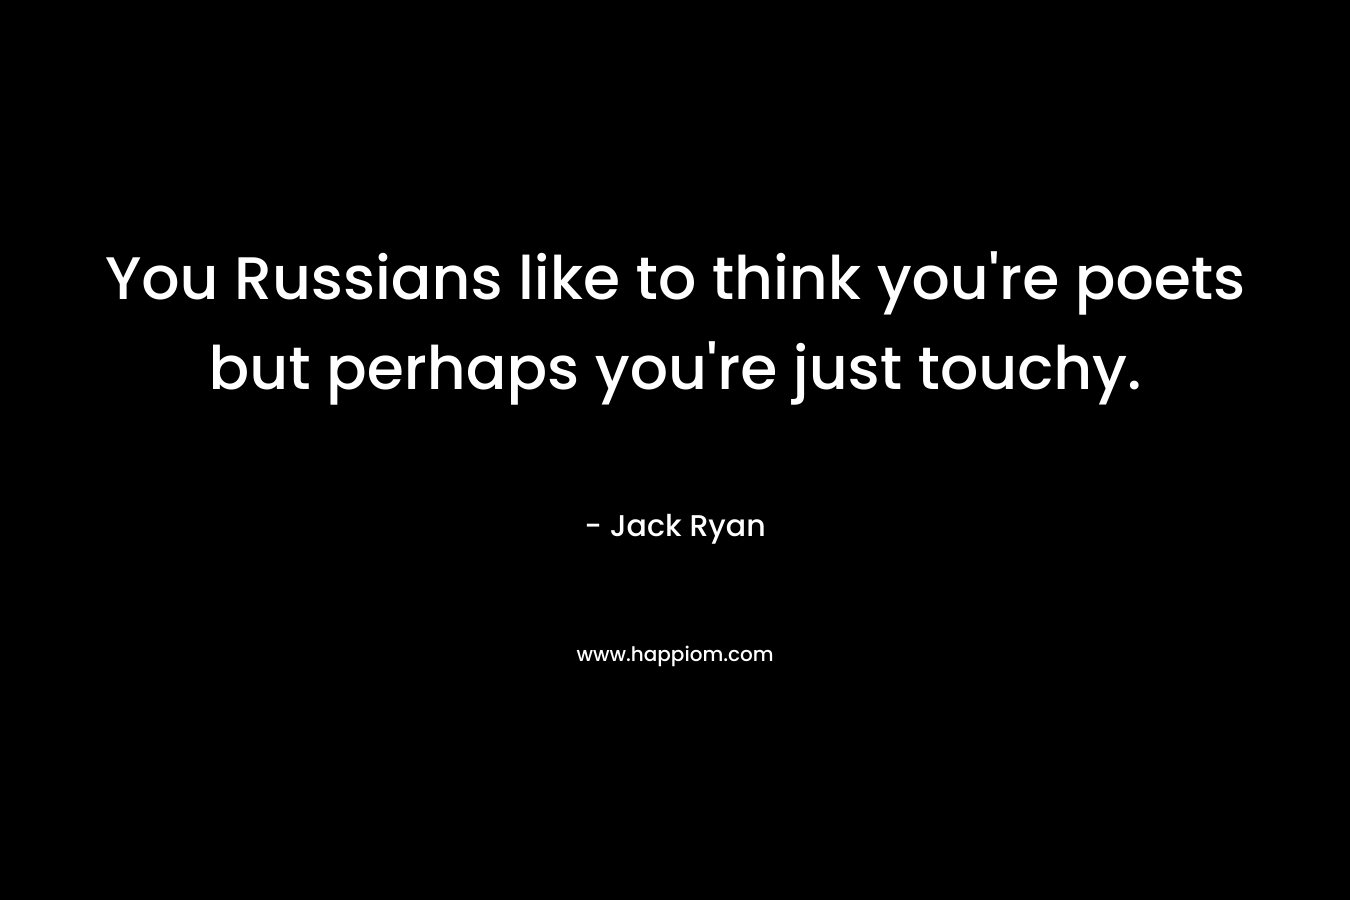 You Russians like to think you're poets but perhaps you're just touchy.